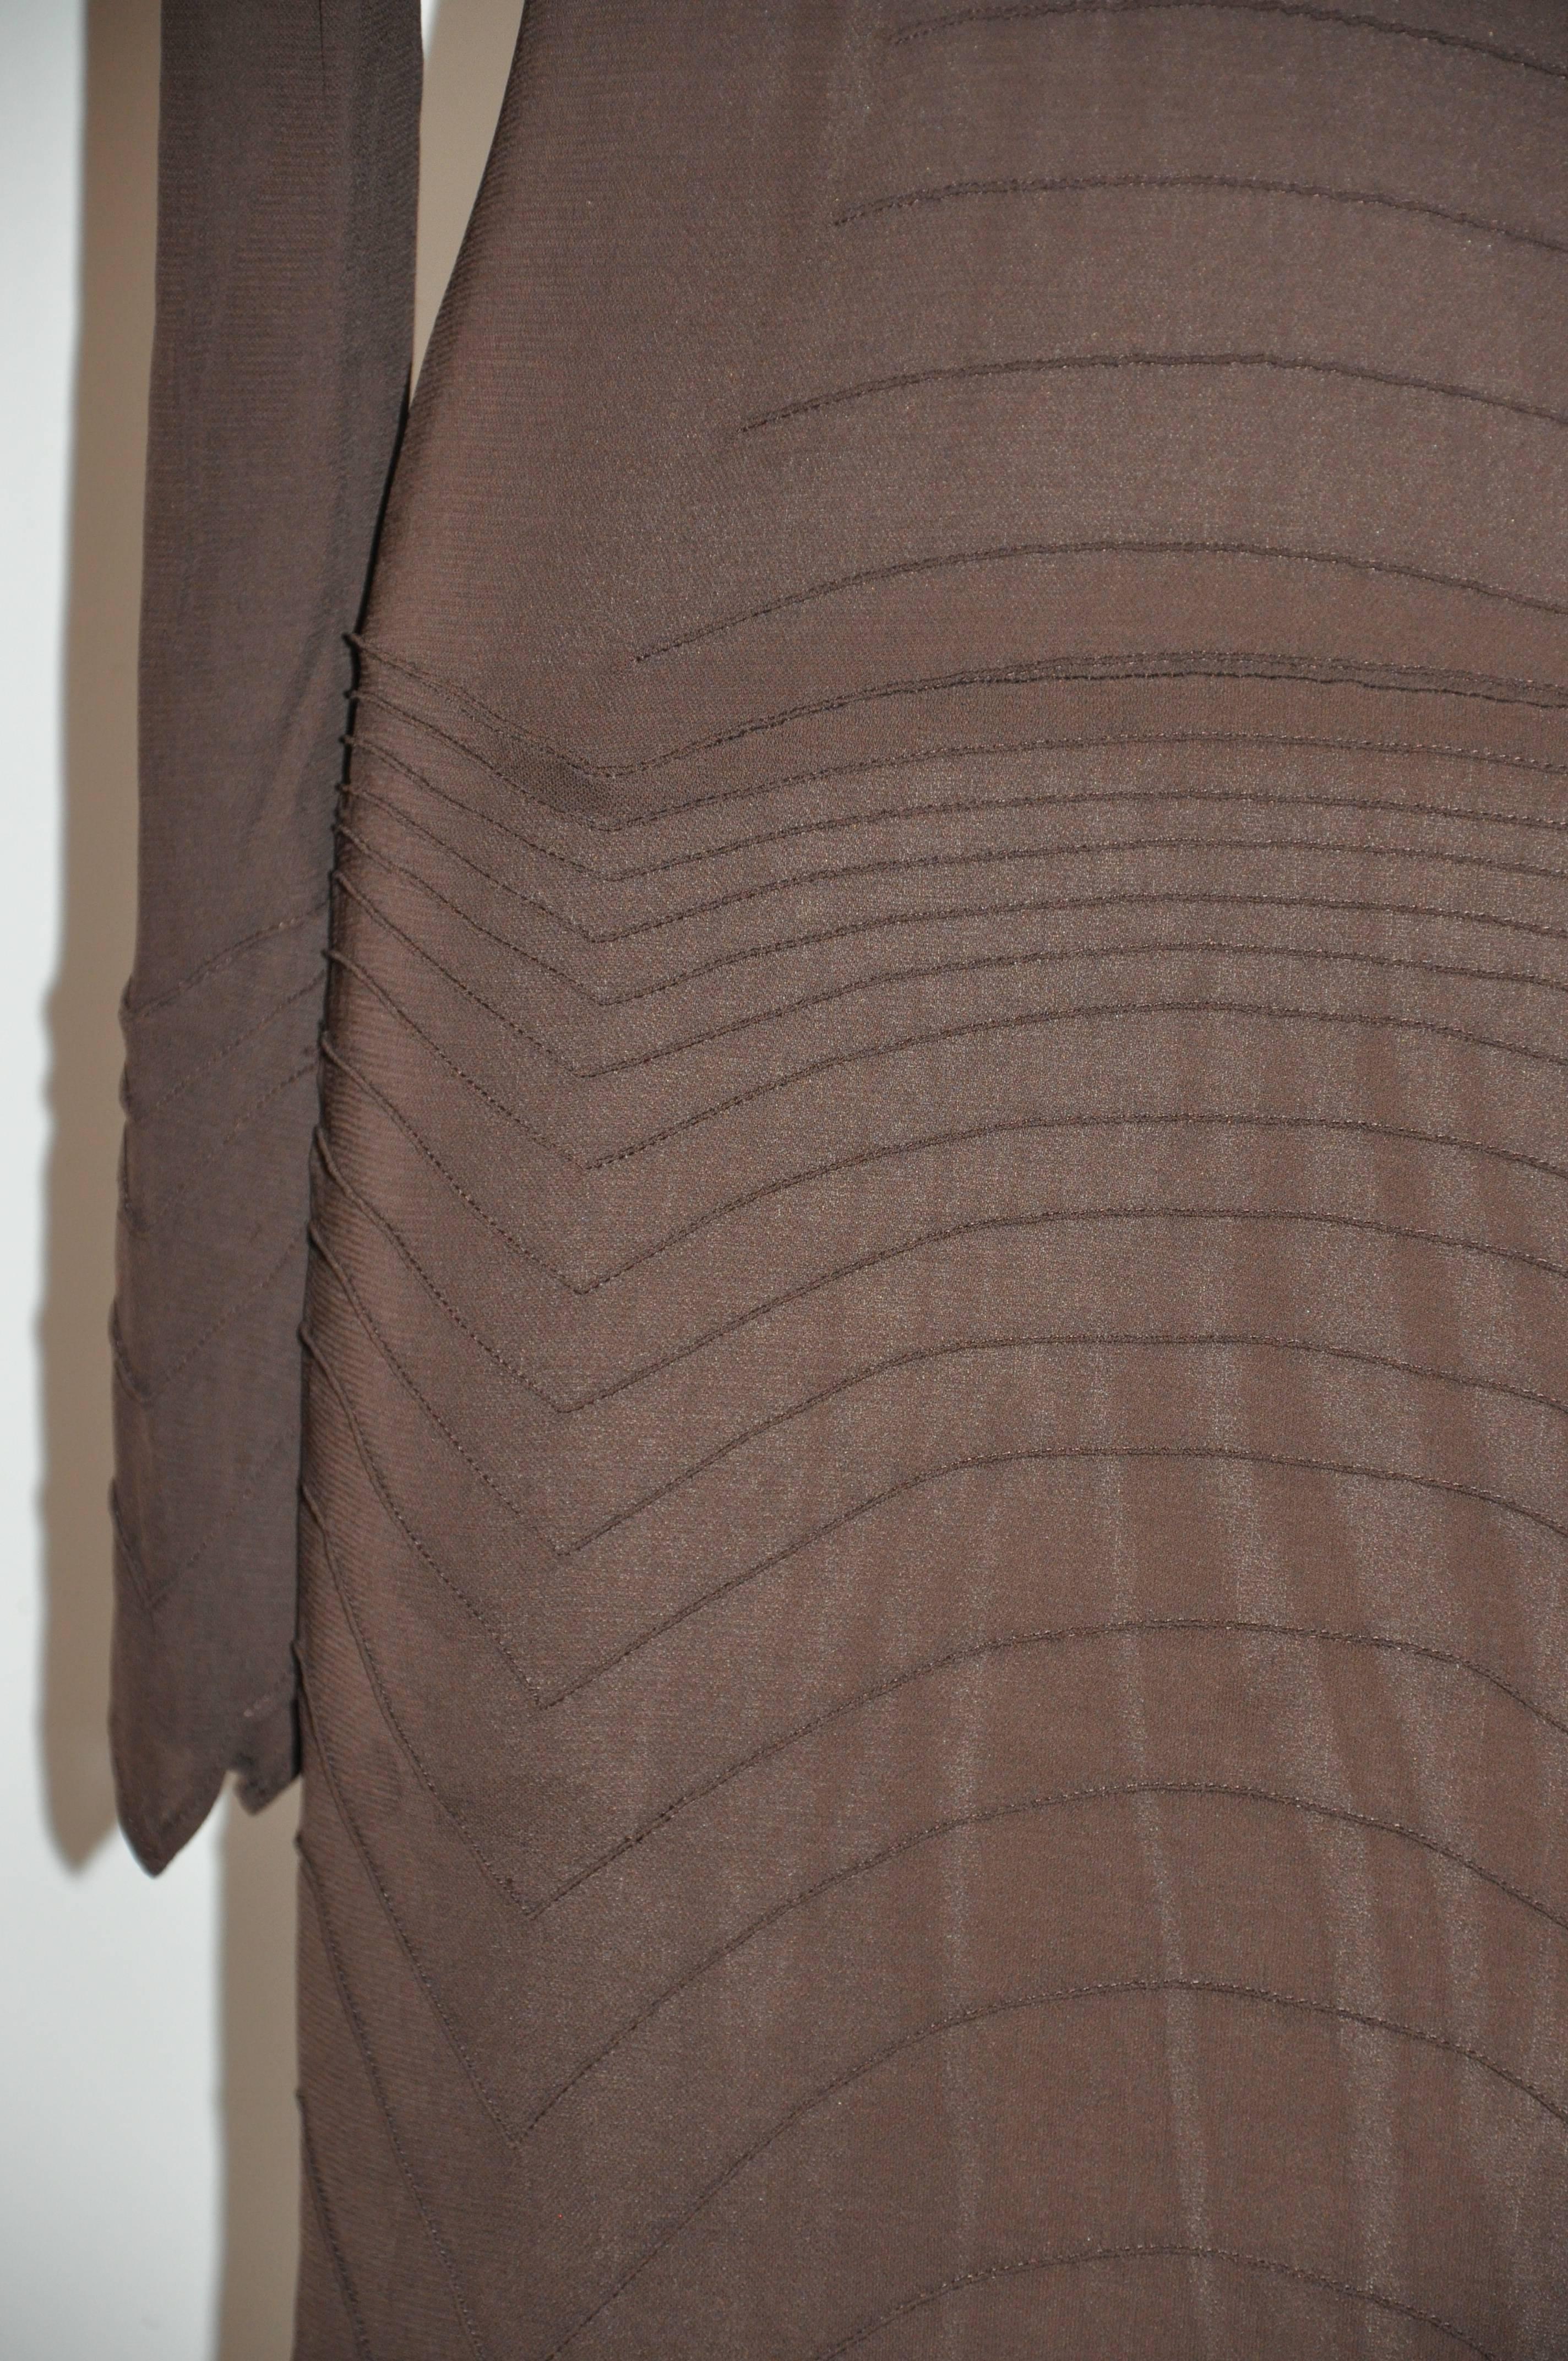 Yves Saint Laurent Coco Brown Form-Fitting Lined Jersey Dress In Good Condition For Sale In New York, NY